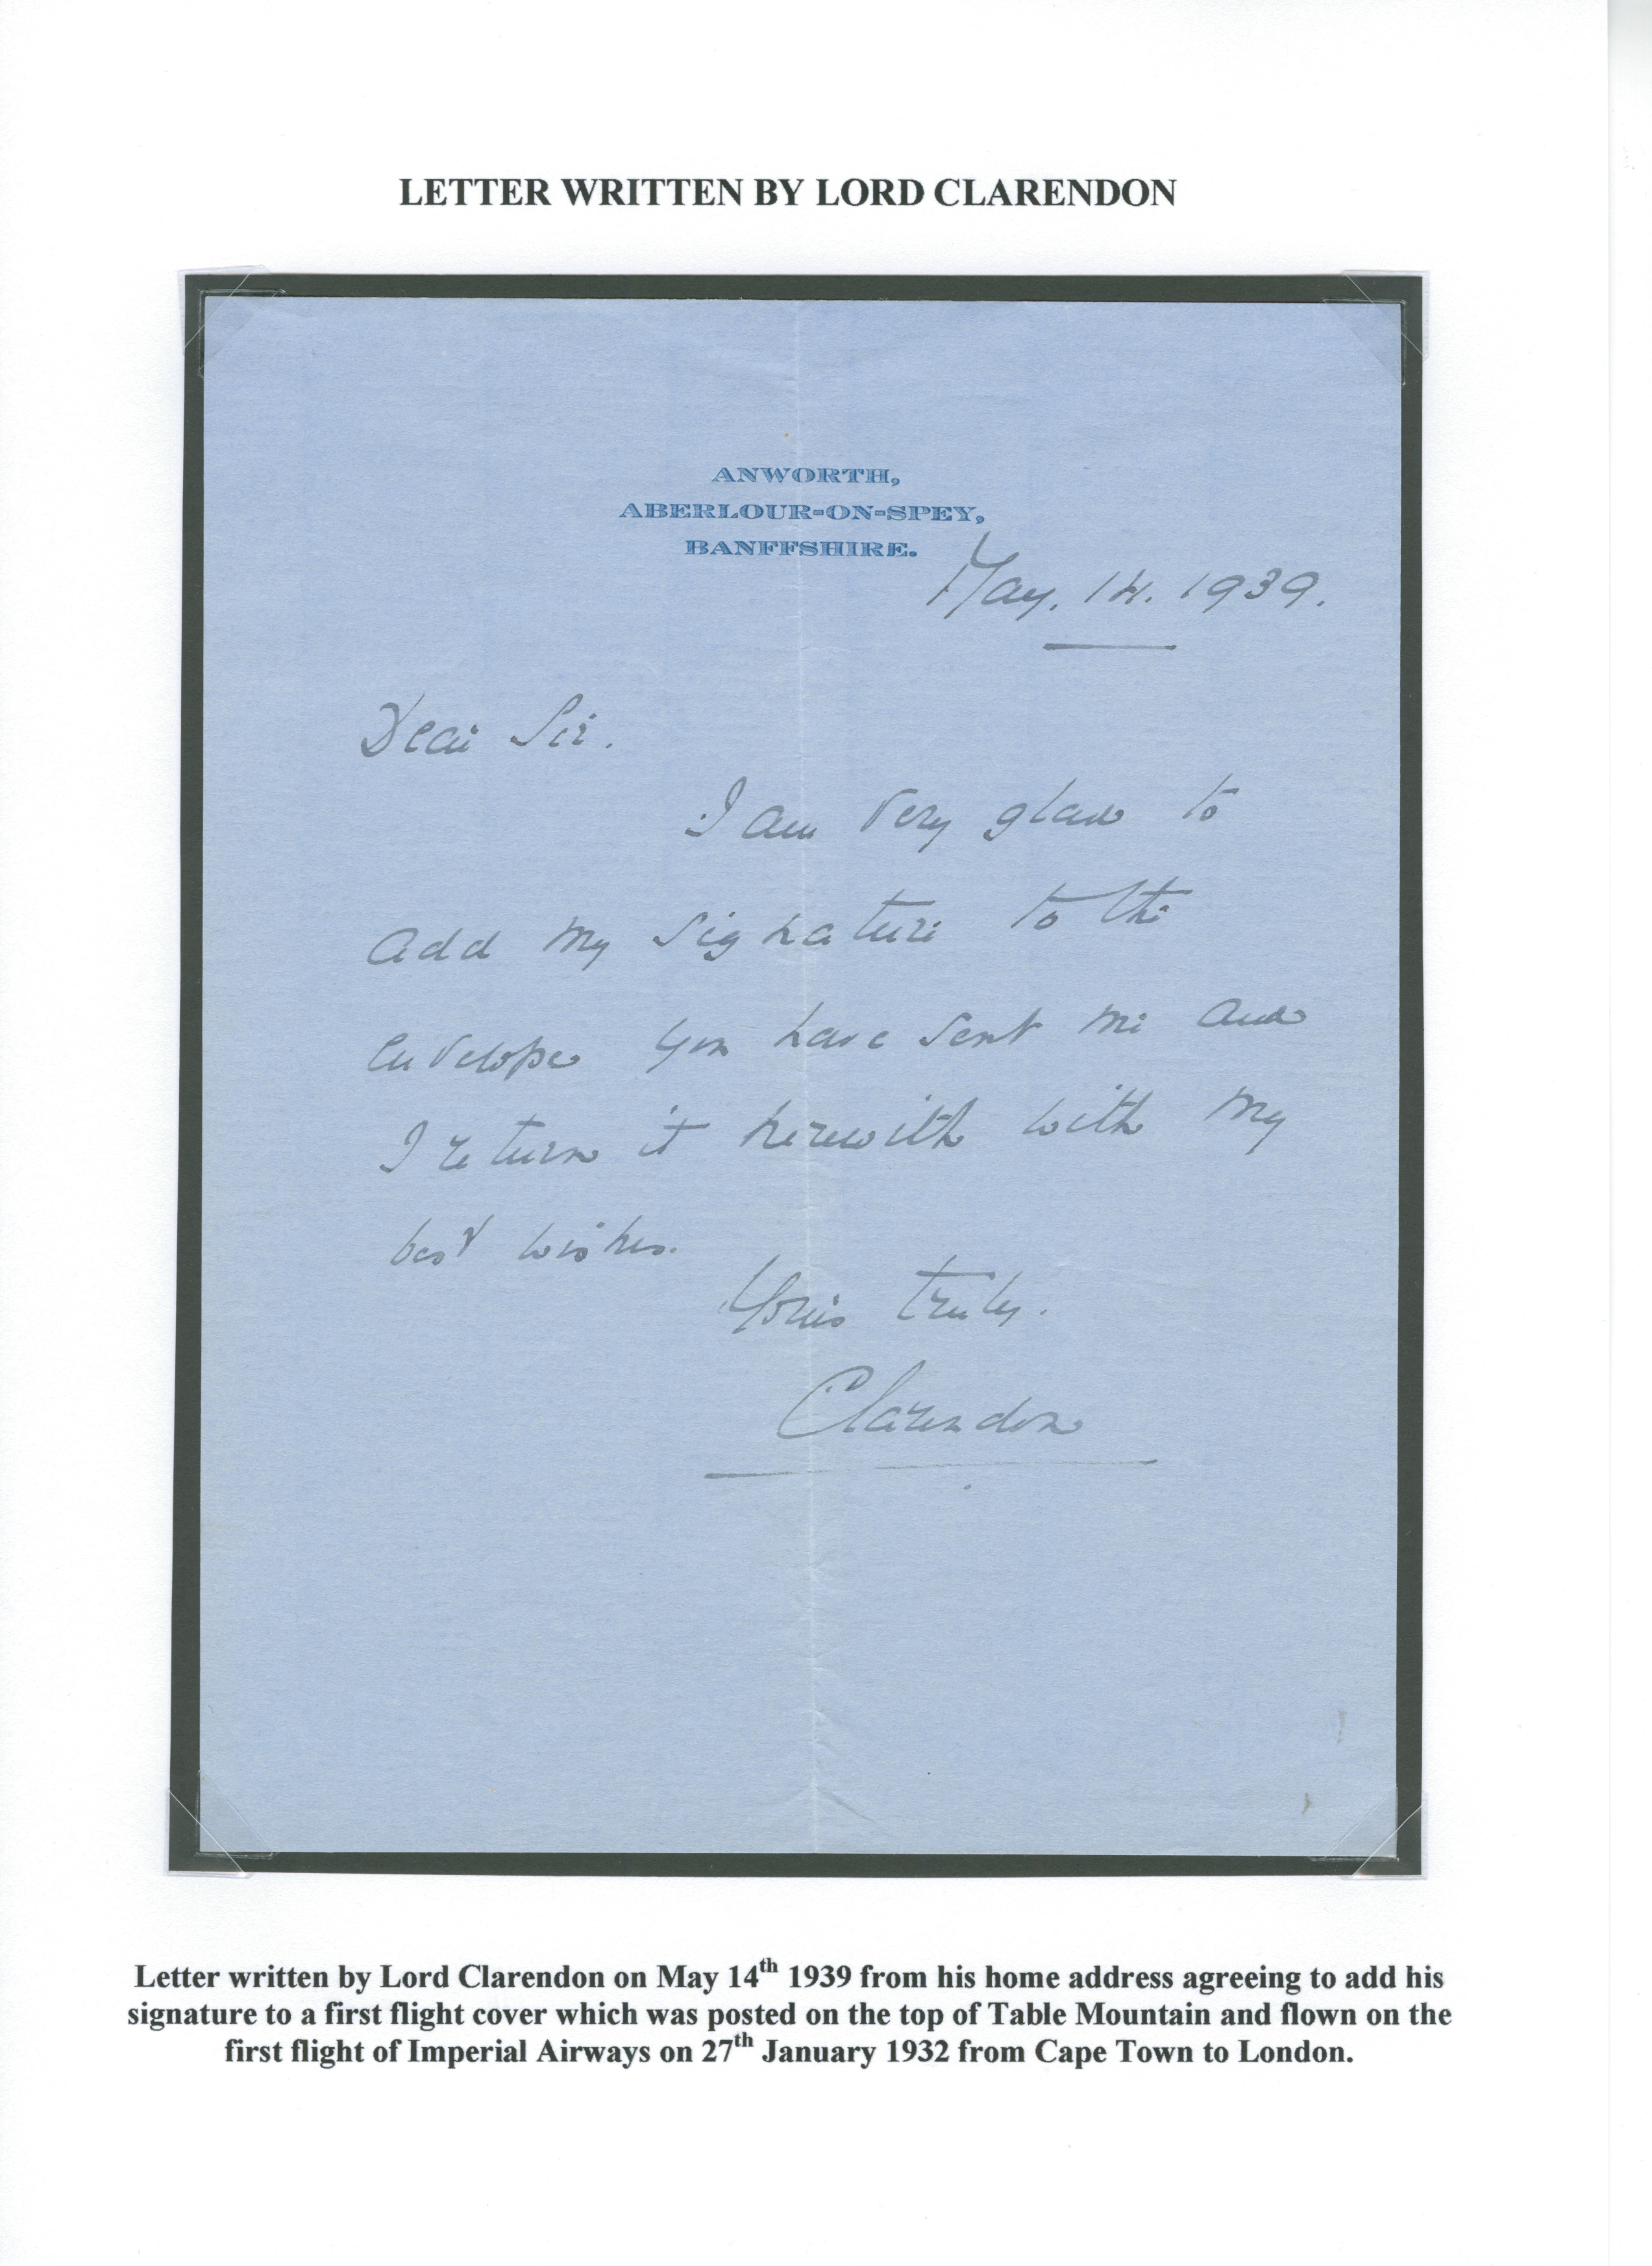 Lord-Clarendon-Letter-1939.jpg